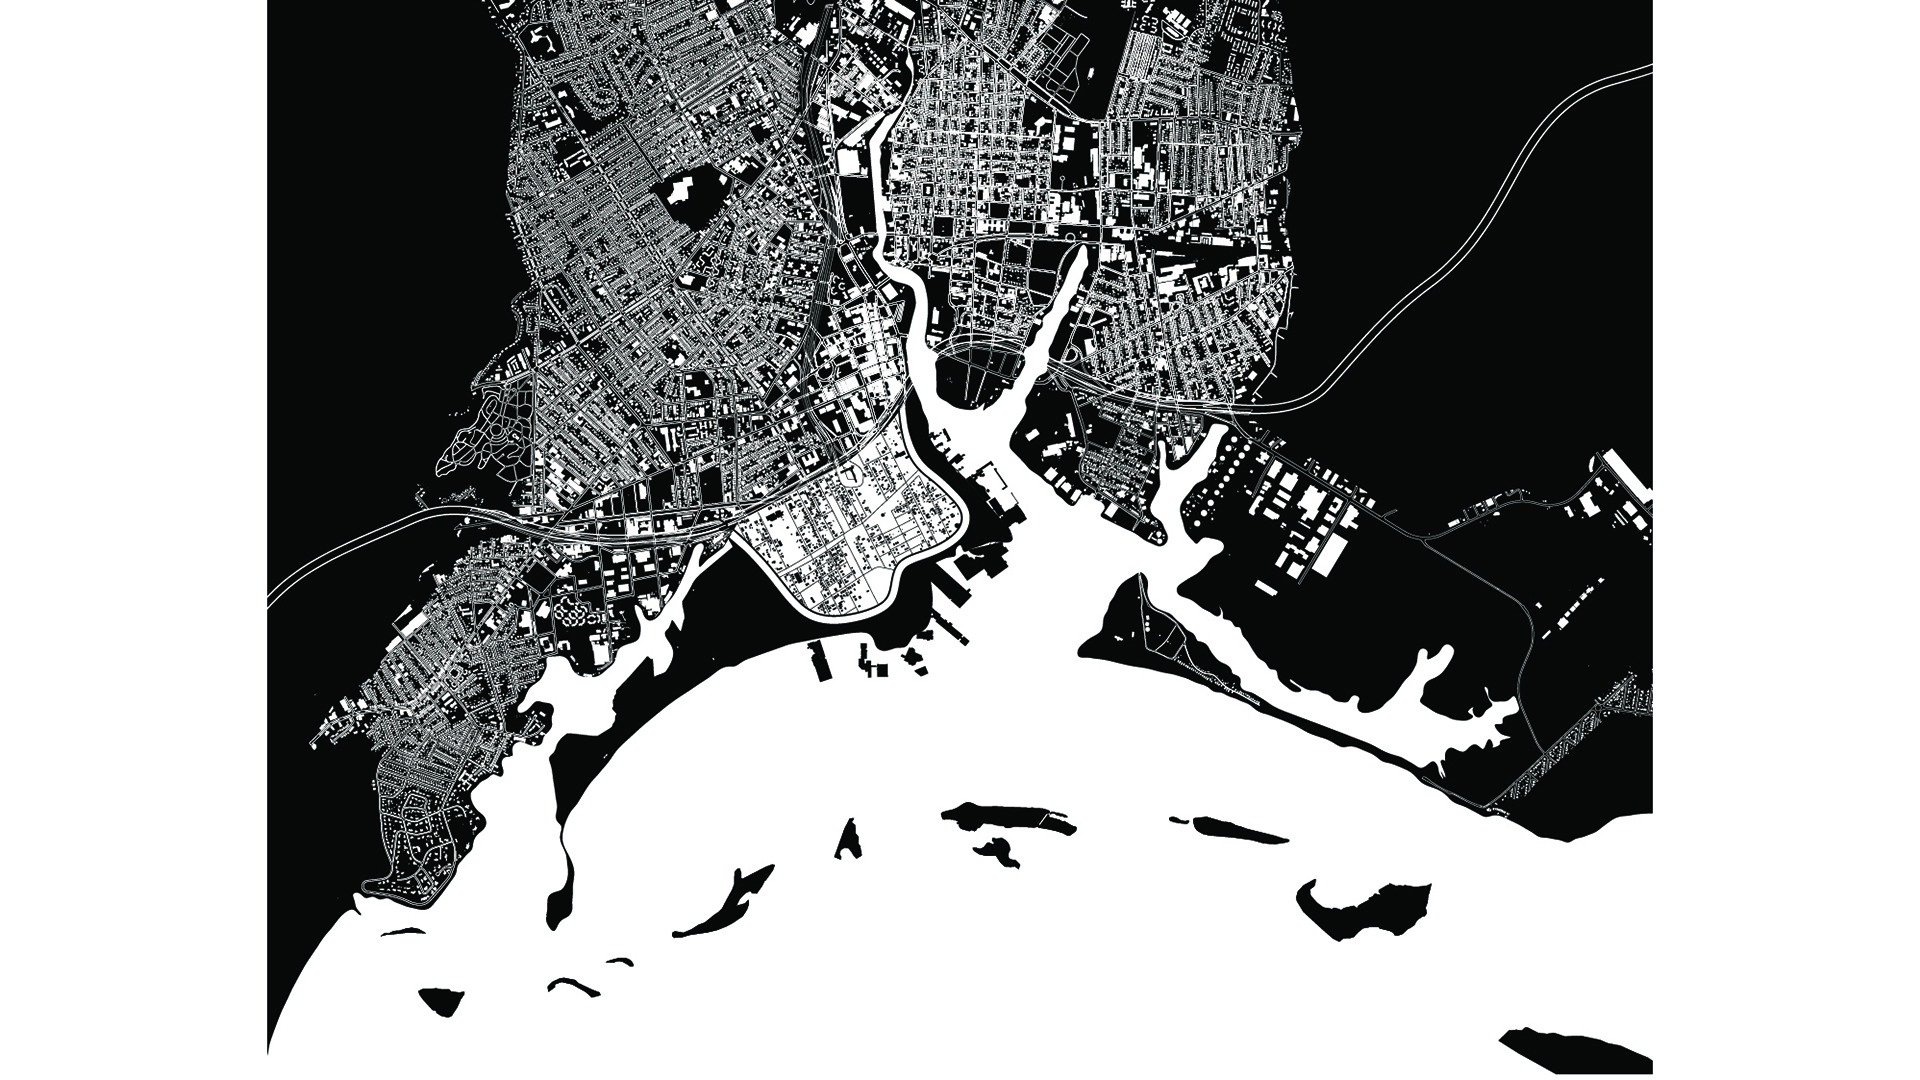 Figure-ground map of a city